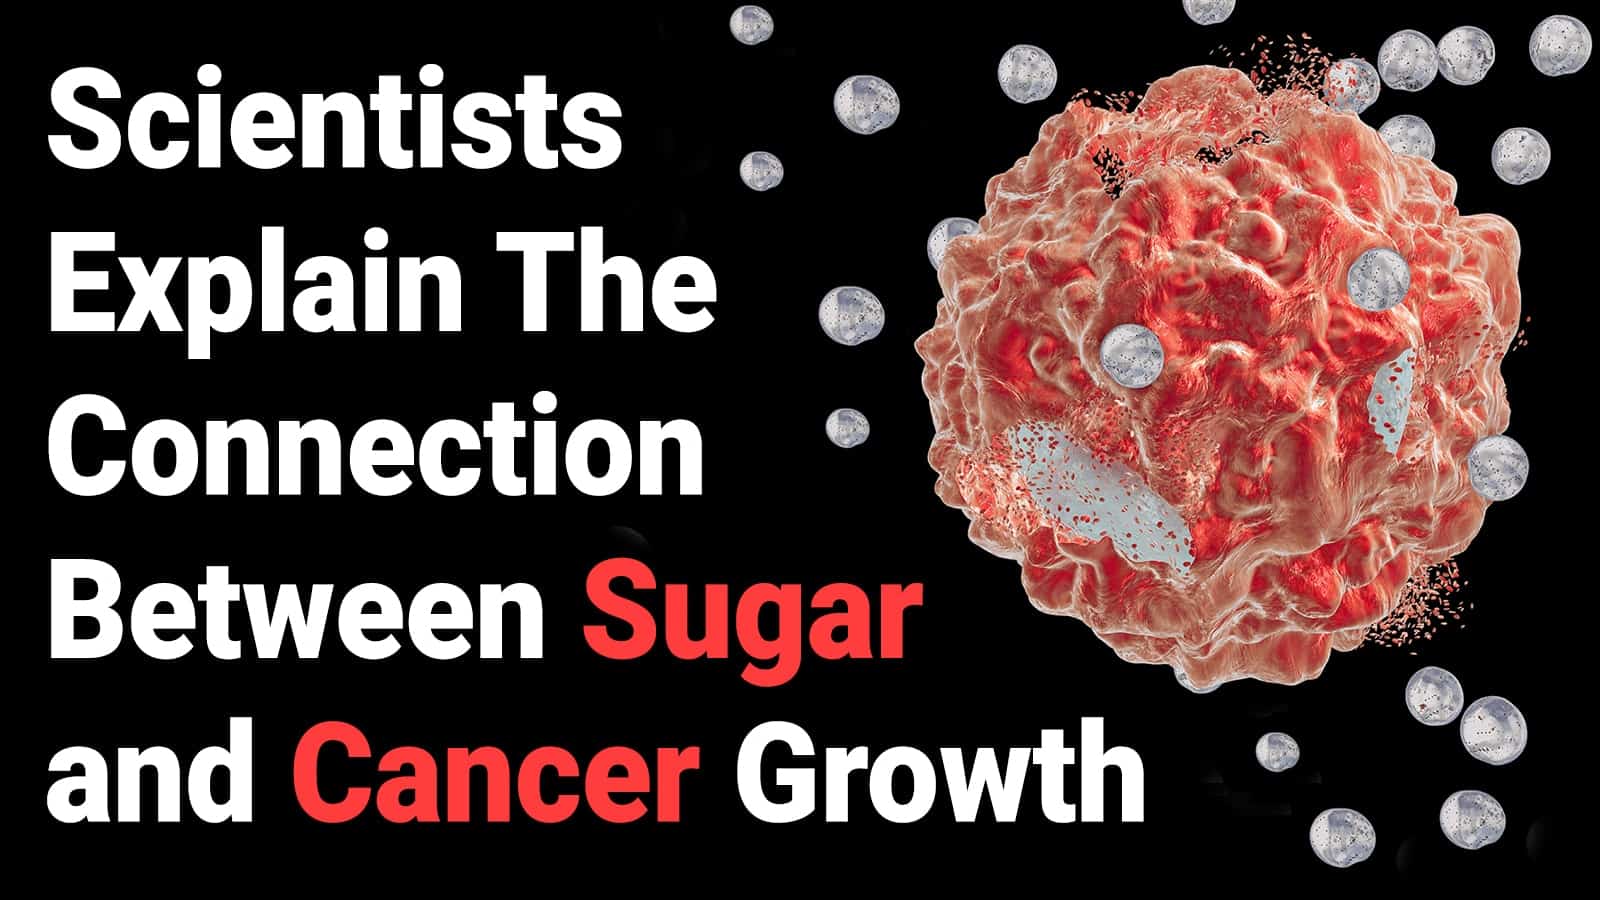 Scientists Explain Connection Between Sugar and Cancer Growth